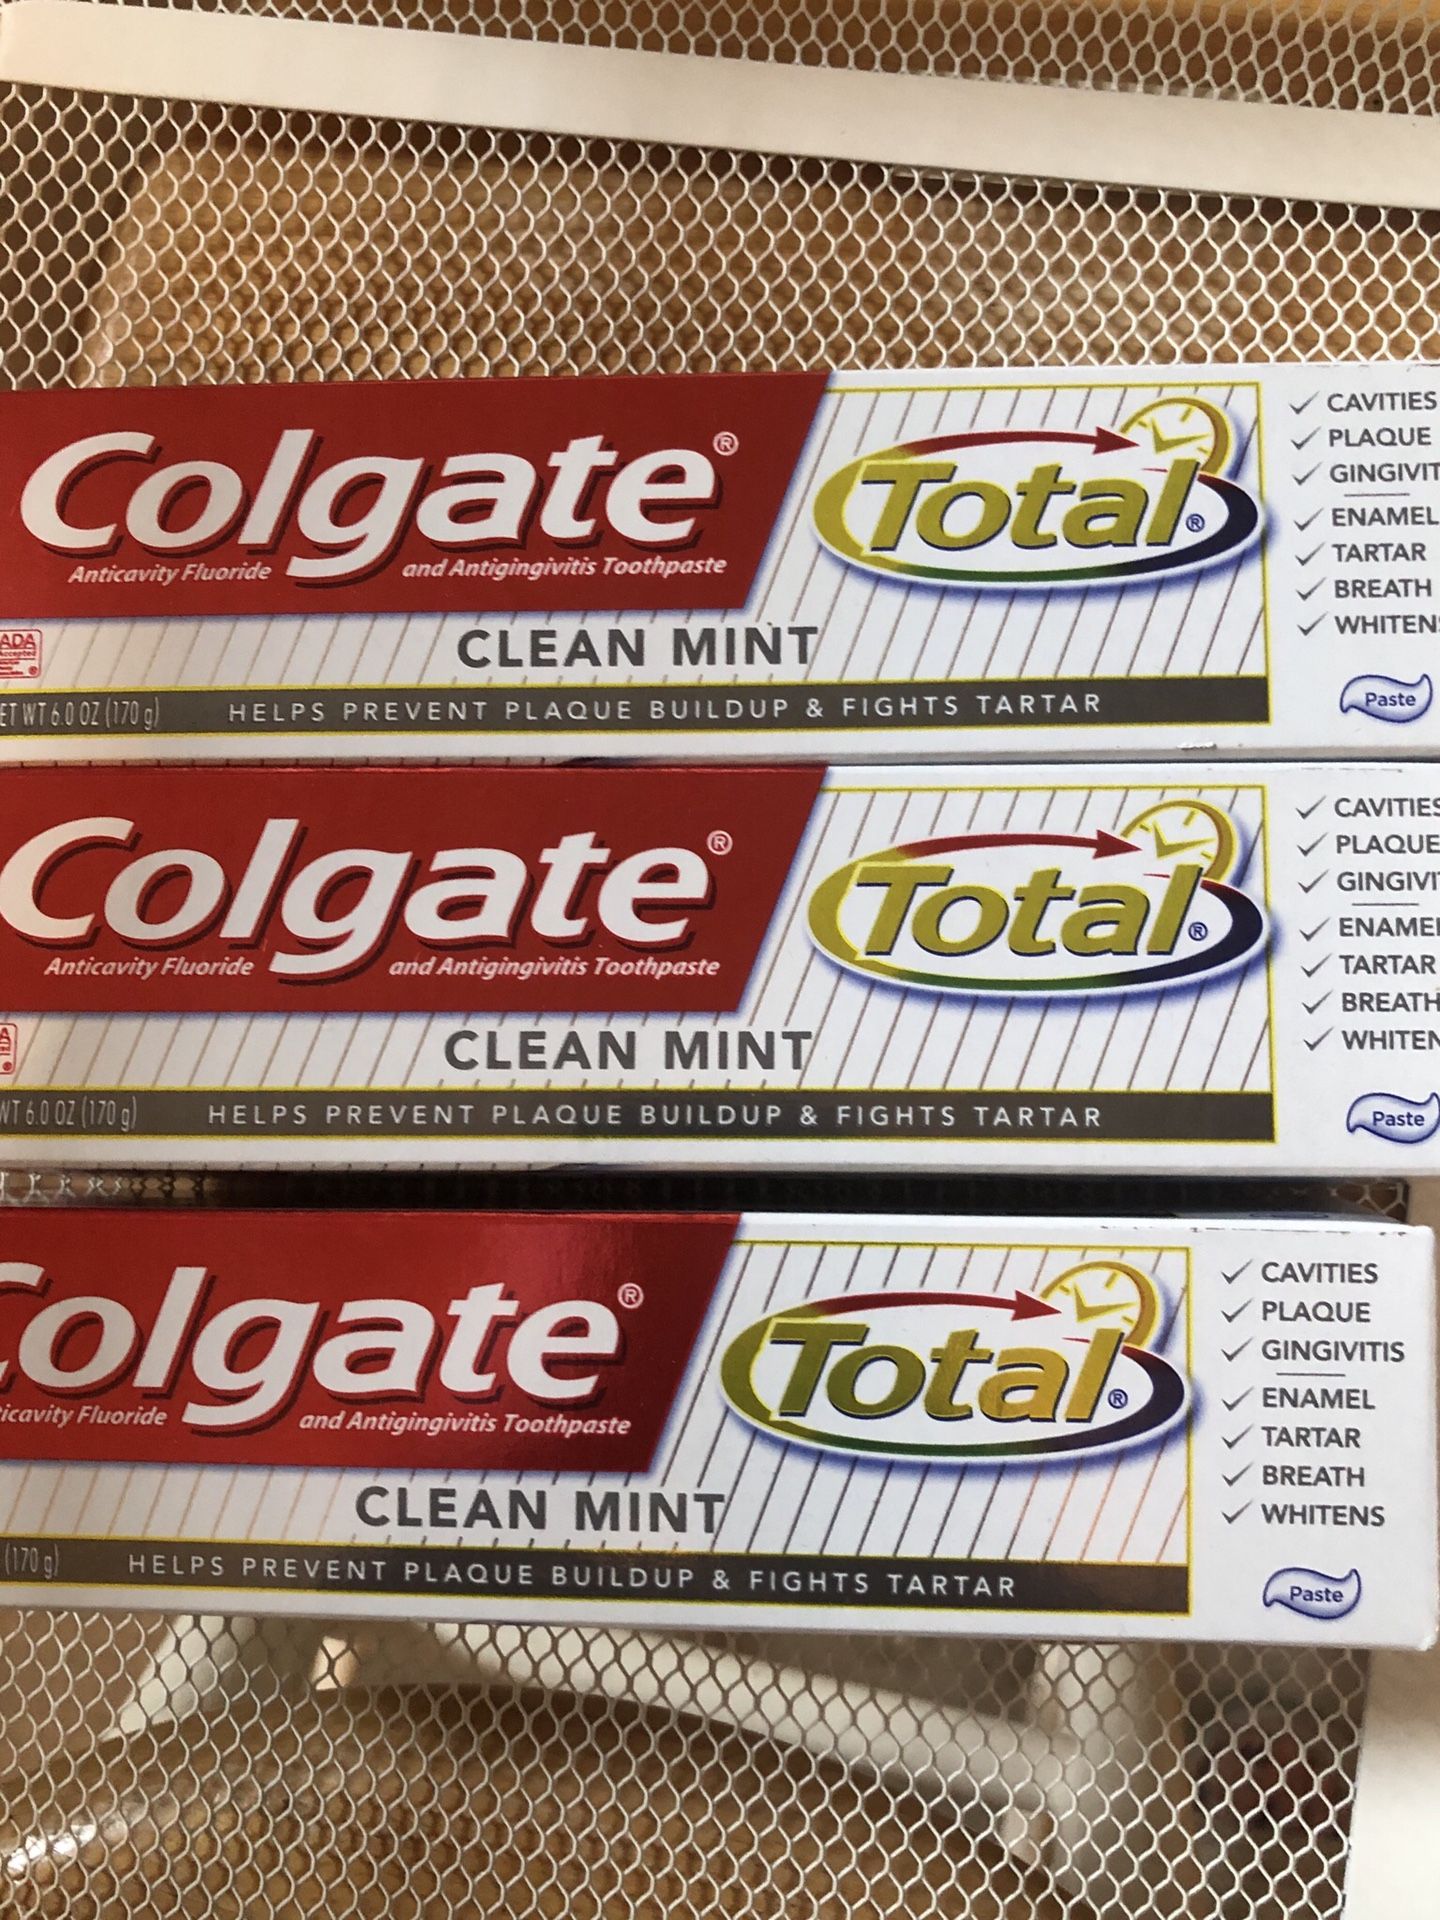 3 Colgate Total toothpastes